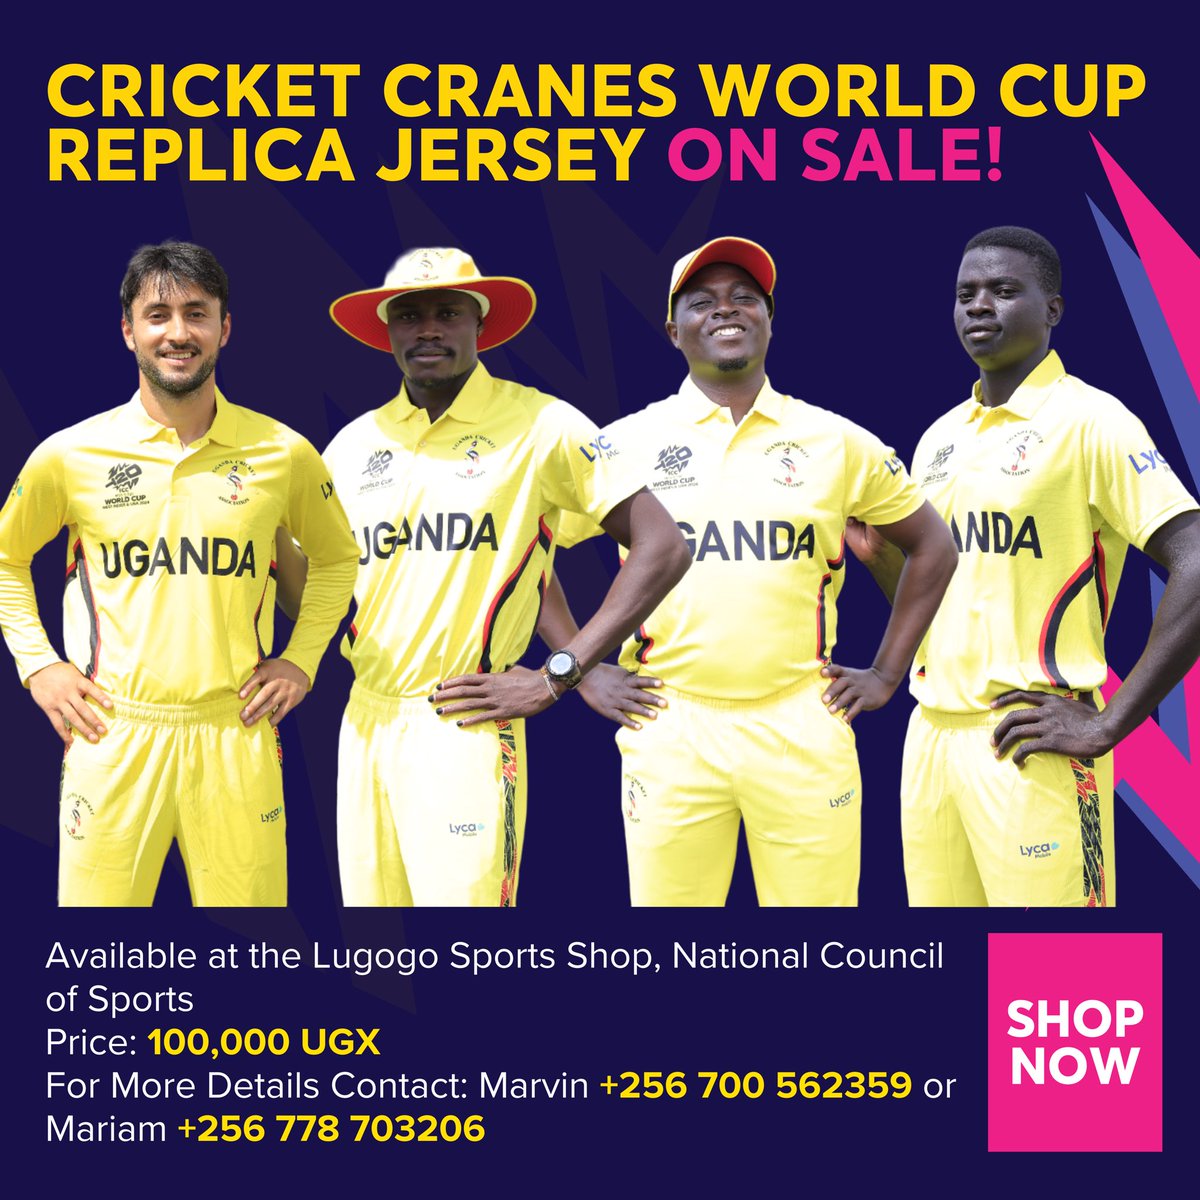 Get your jersey now for just 100,000/=. Look sharp and cheer on the Cricket Cranes in the World Cup! #T20WorldCup #WeAreCricketCranes